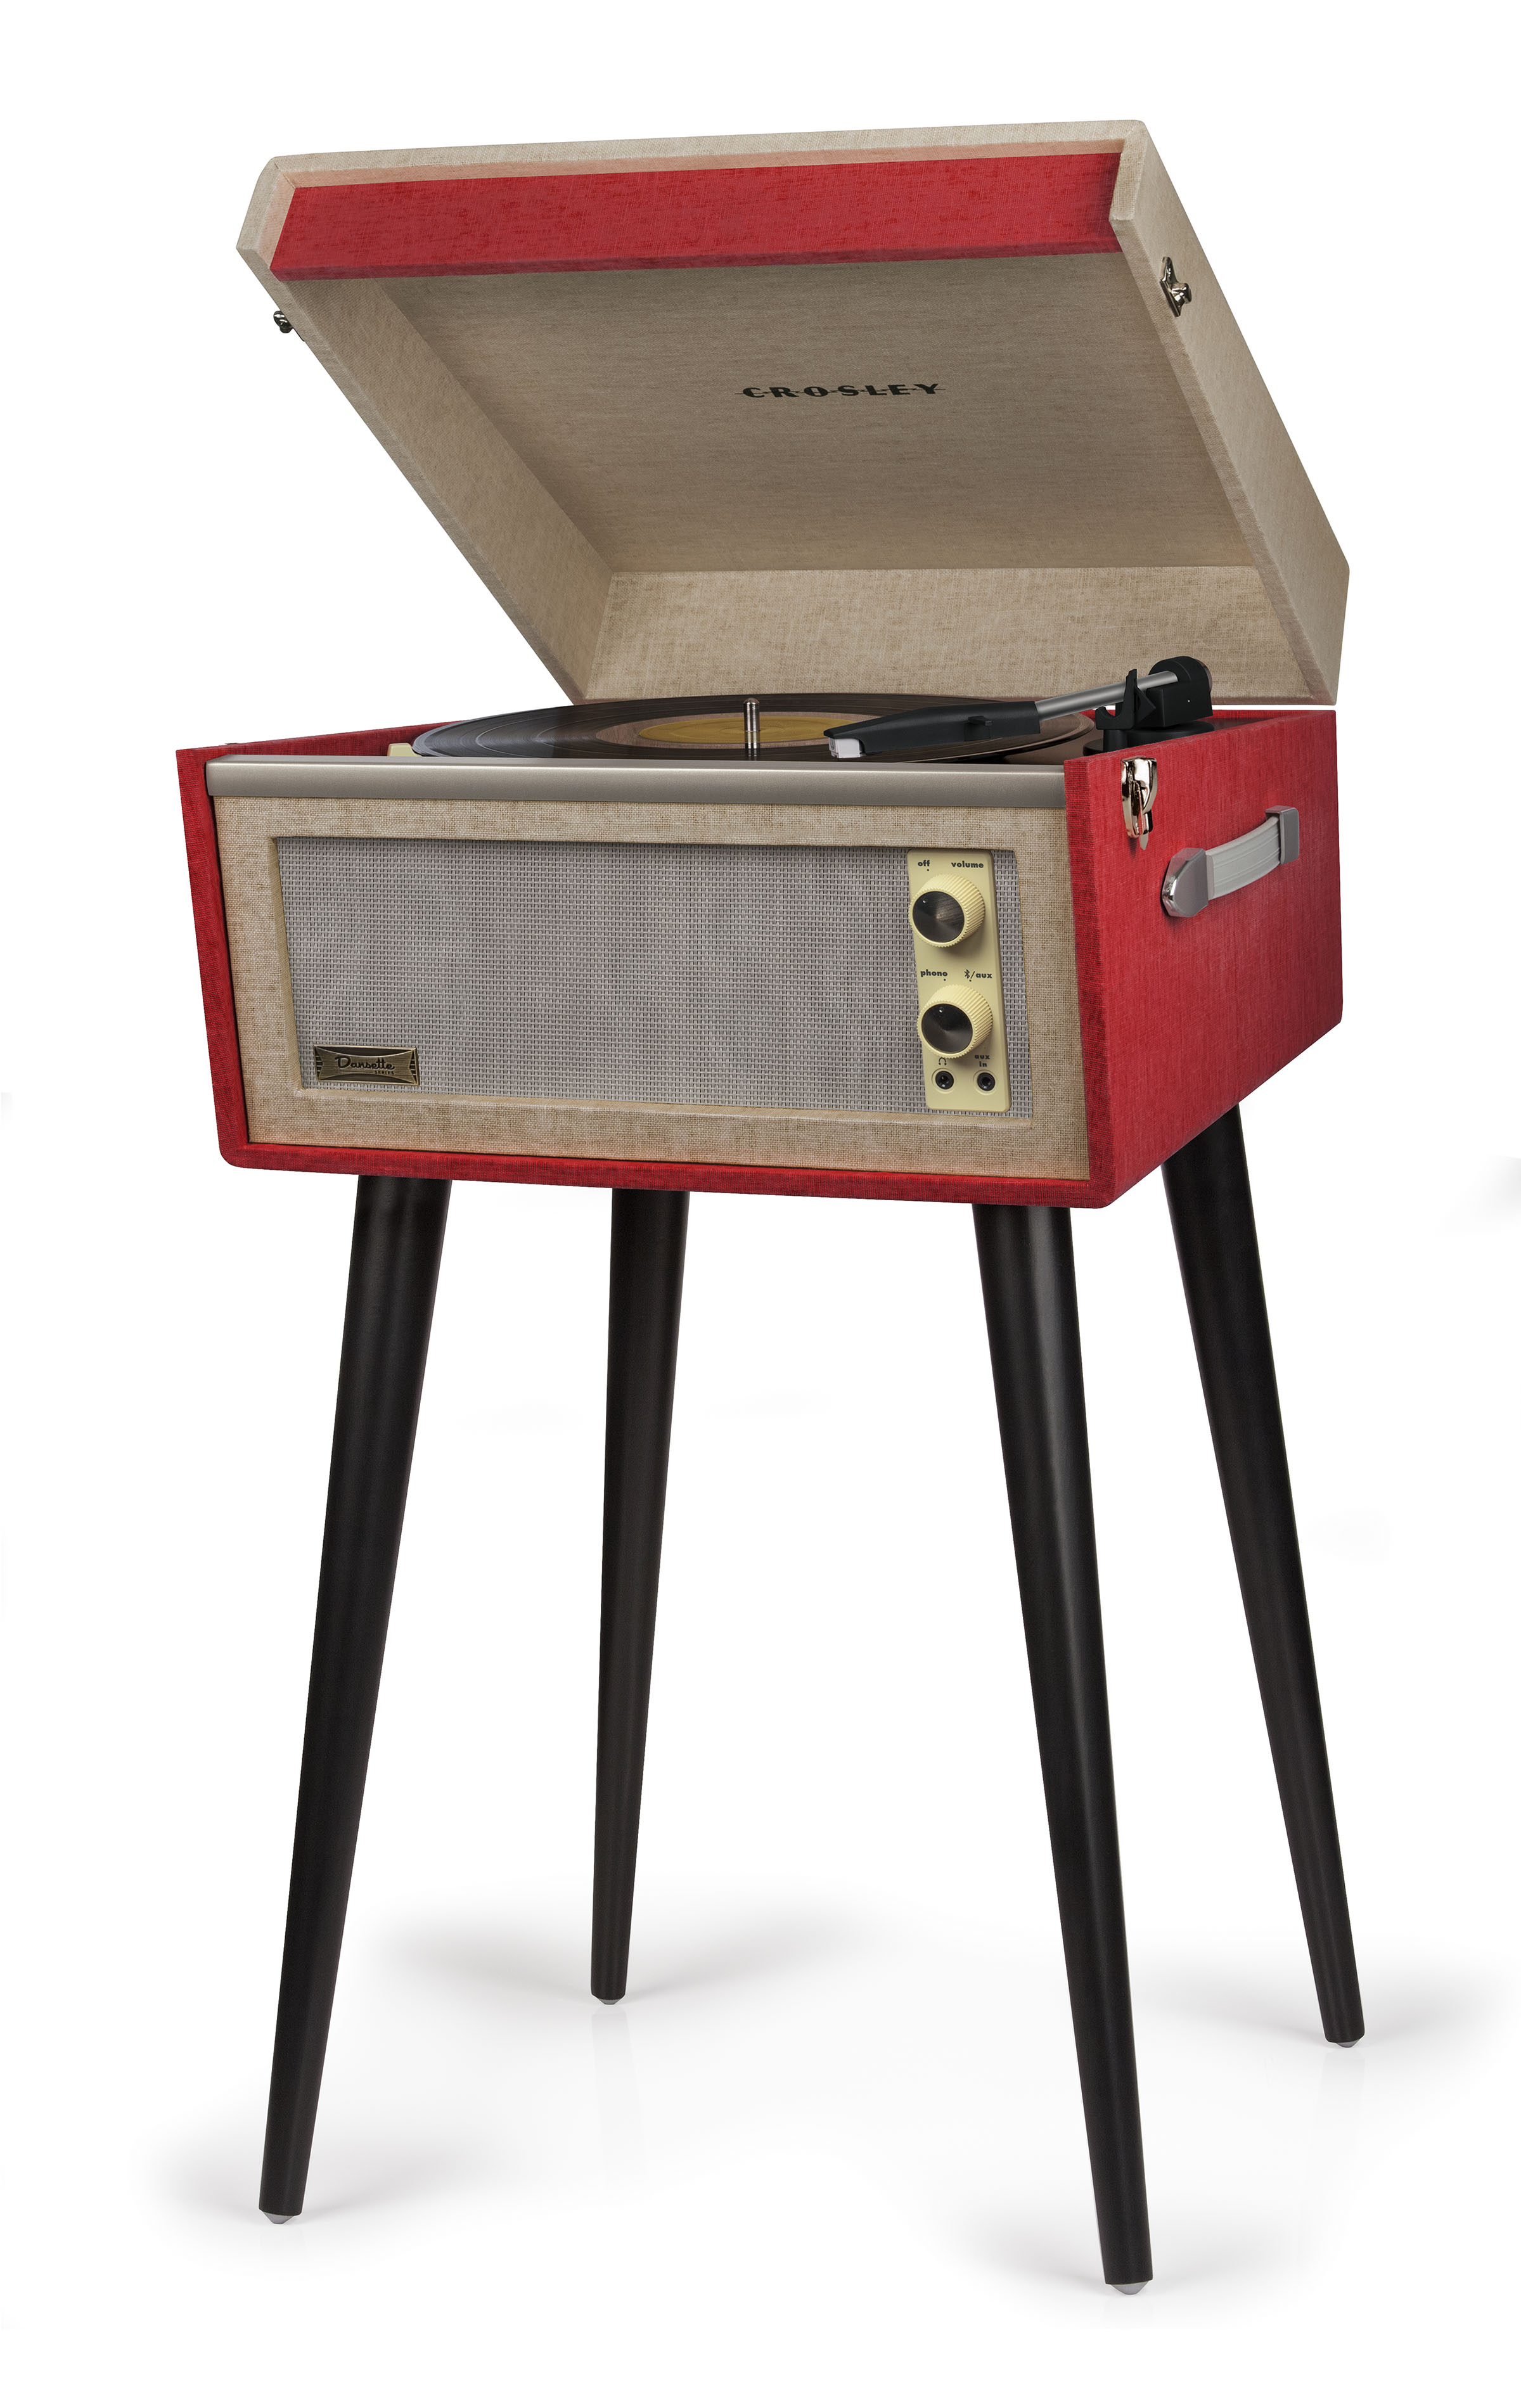 Crosley Dansette Bermuda Bluetooth Portable Suitcase Record Player with 2-speed Turntable - Red - CR6233D-RE - image 2 of 7